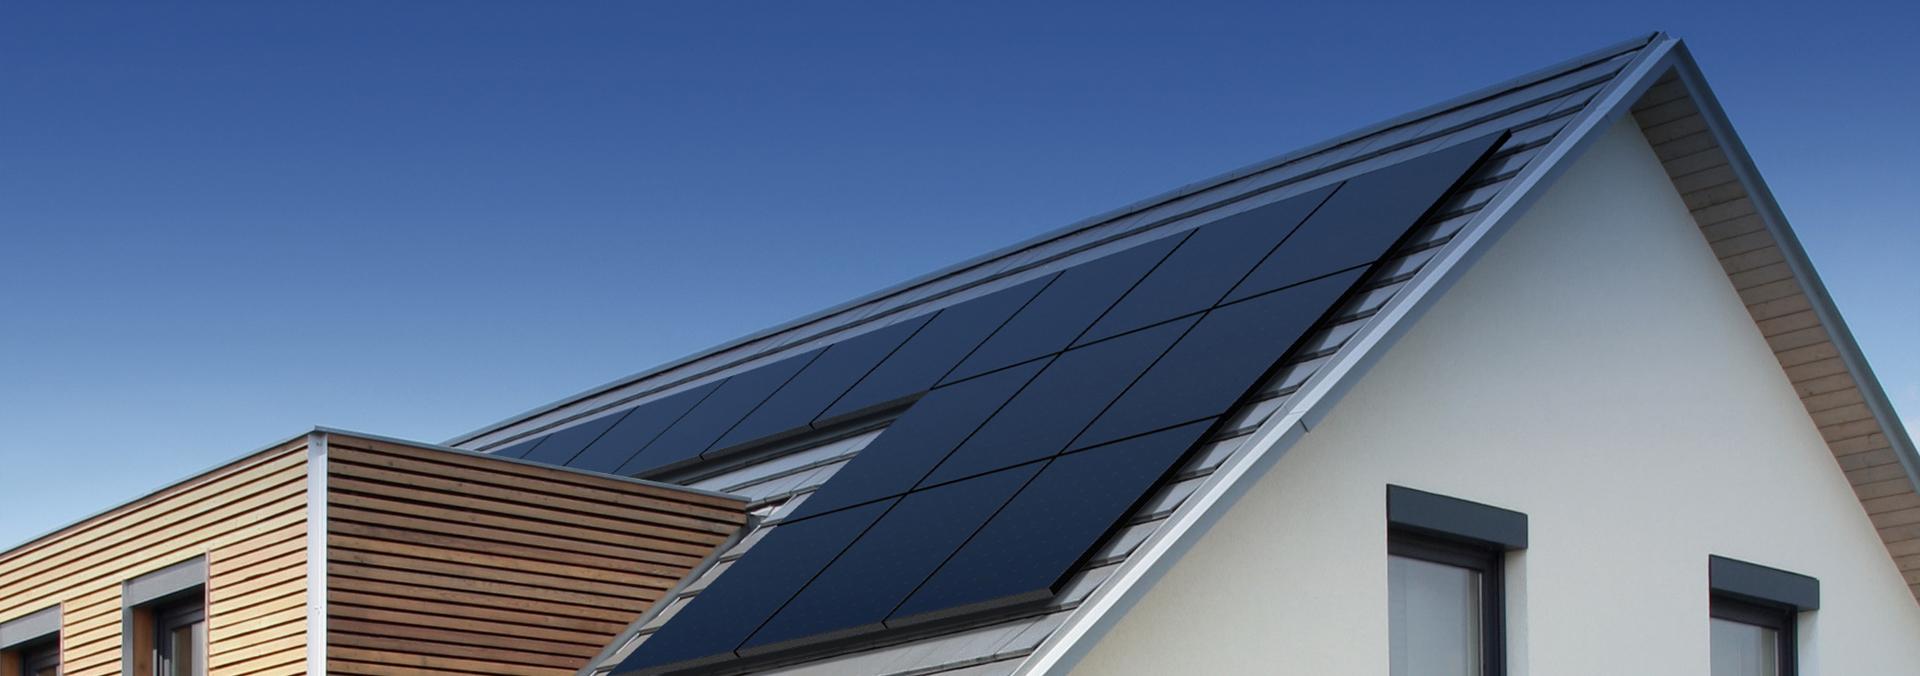 Boost Your Property Value With Solar Panels